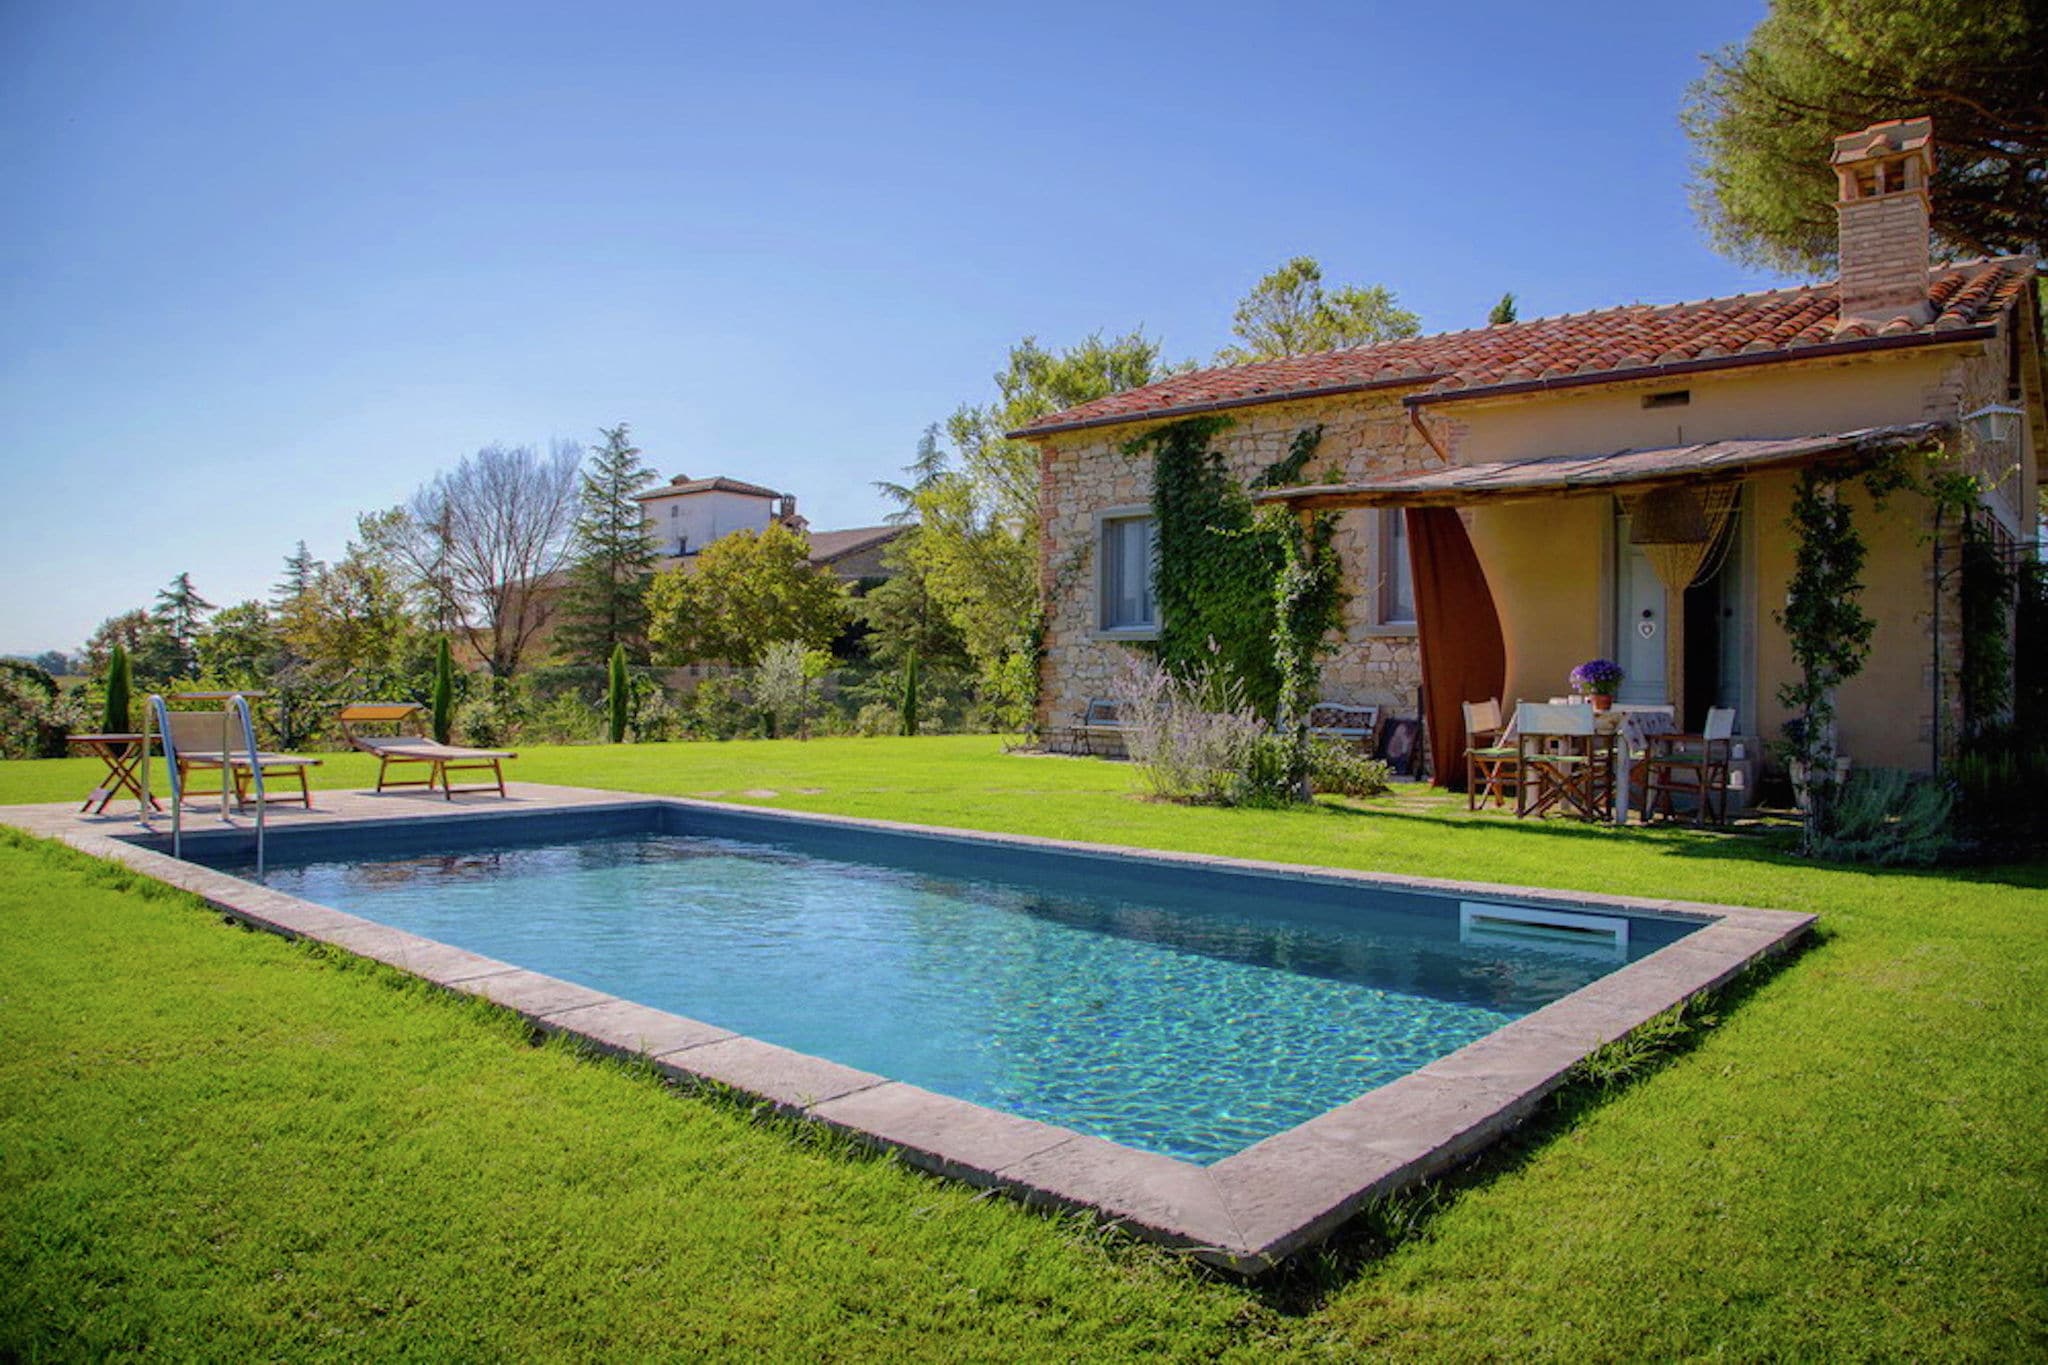 4-person villa with private swimming pool and garden in lovely surroundings near Cortona